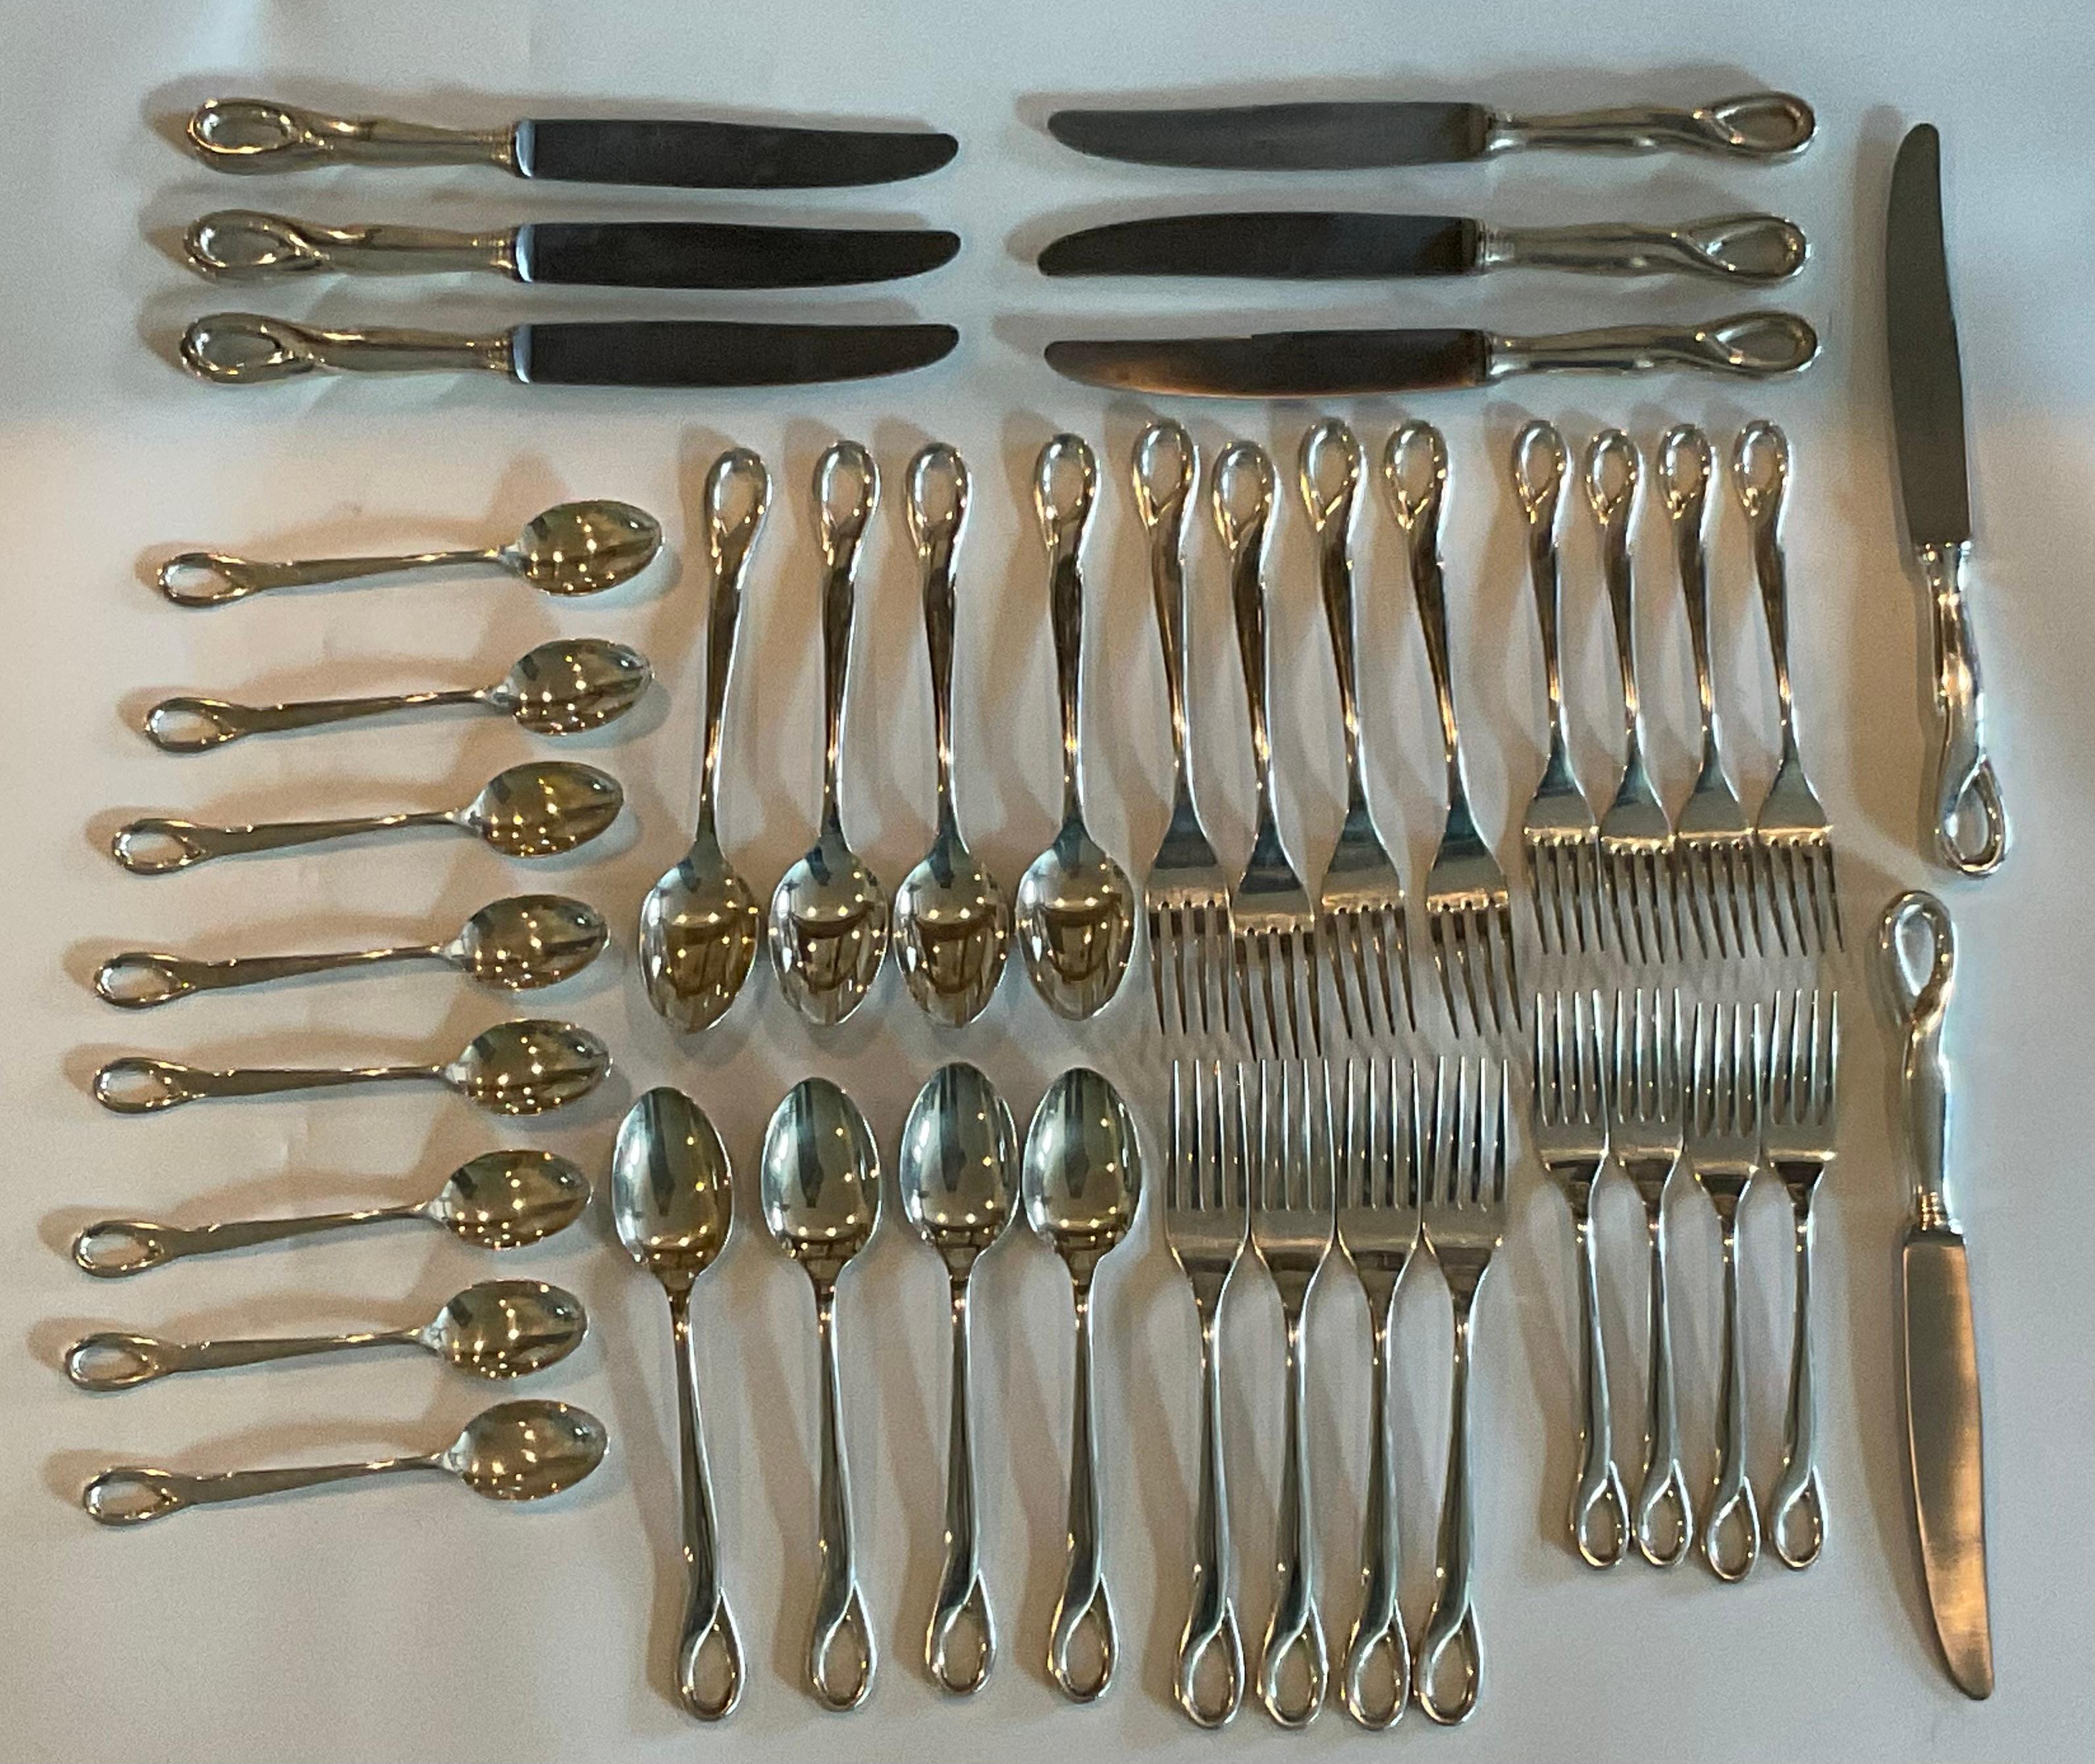 Elsa Peretti 40 Piece Tiffany and Company Padova Sterling Silver Flatware Set. Each piece signed and hallmarked. 16 Spoons, 16 Forks, and 8 knives. Larger fork weight 2.5 ounces (71 grams). Smaller fork 1.9 ounces (54 grams). Large spoon 2.8 ounces